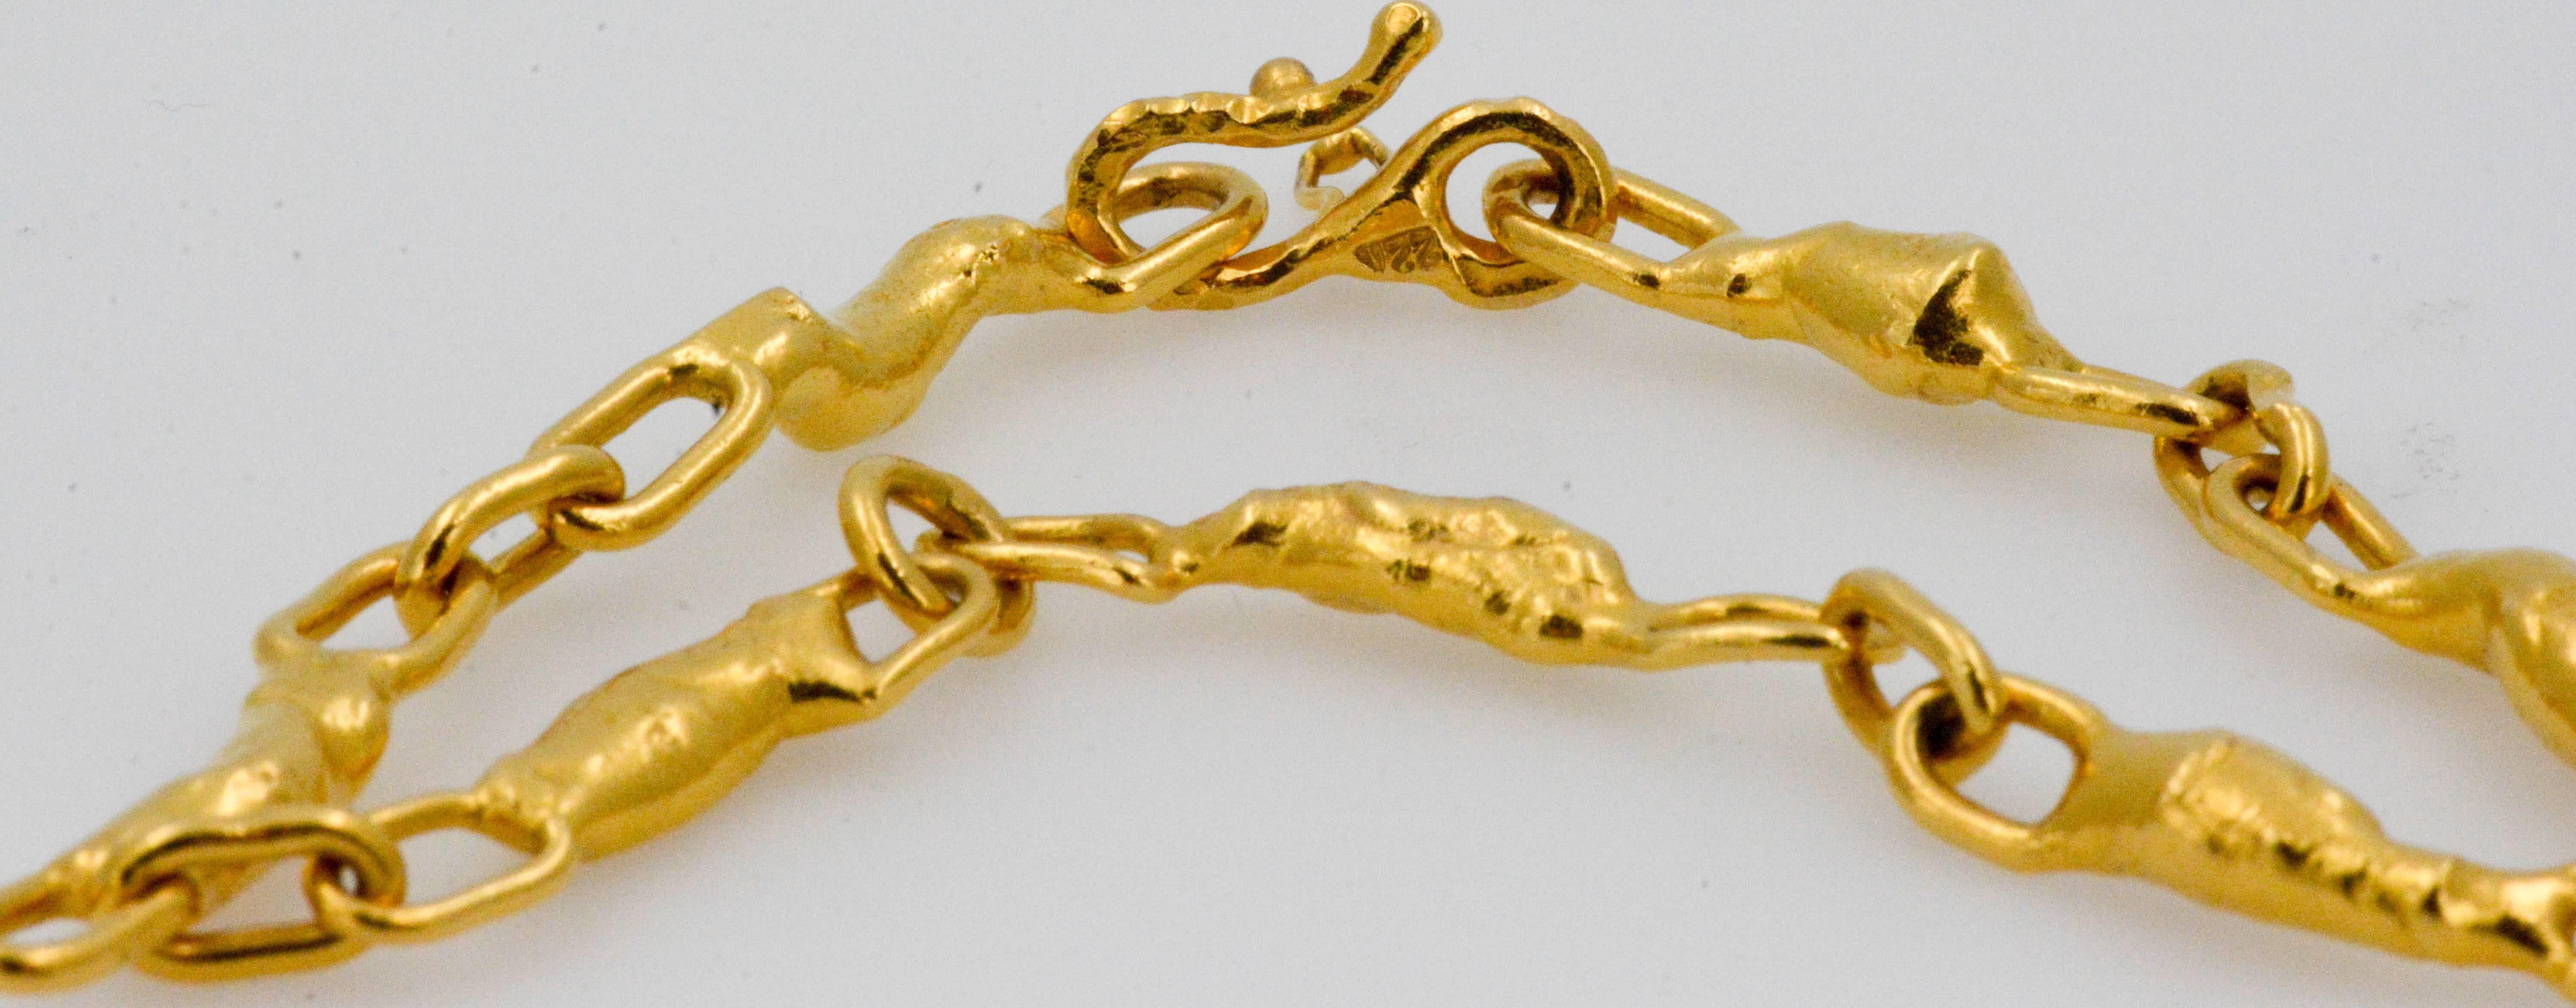 Almost brighter than the sun, this 22 karat yellow gold bracelet will brighten up your life! This bracelet is another captivating creation by designer, Jean Mahie, which is unique, one-of-a-kind, a true work of art. Solid 22 karat gold links